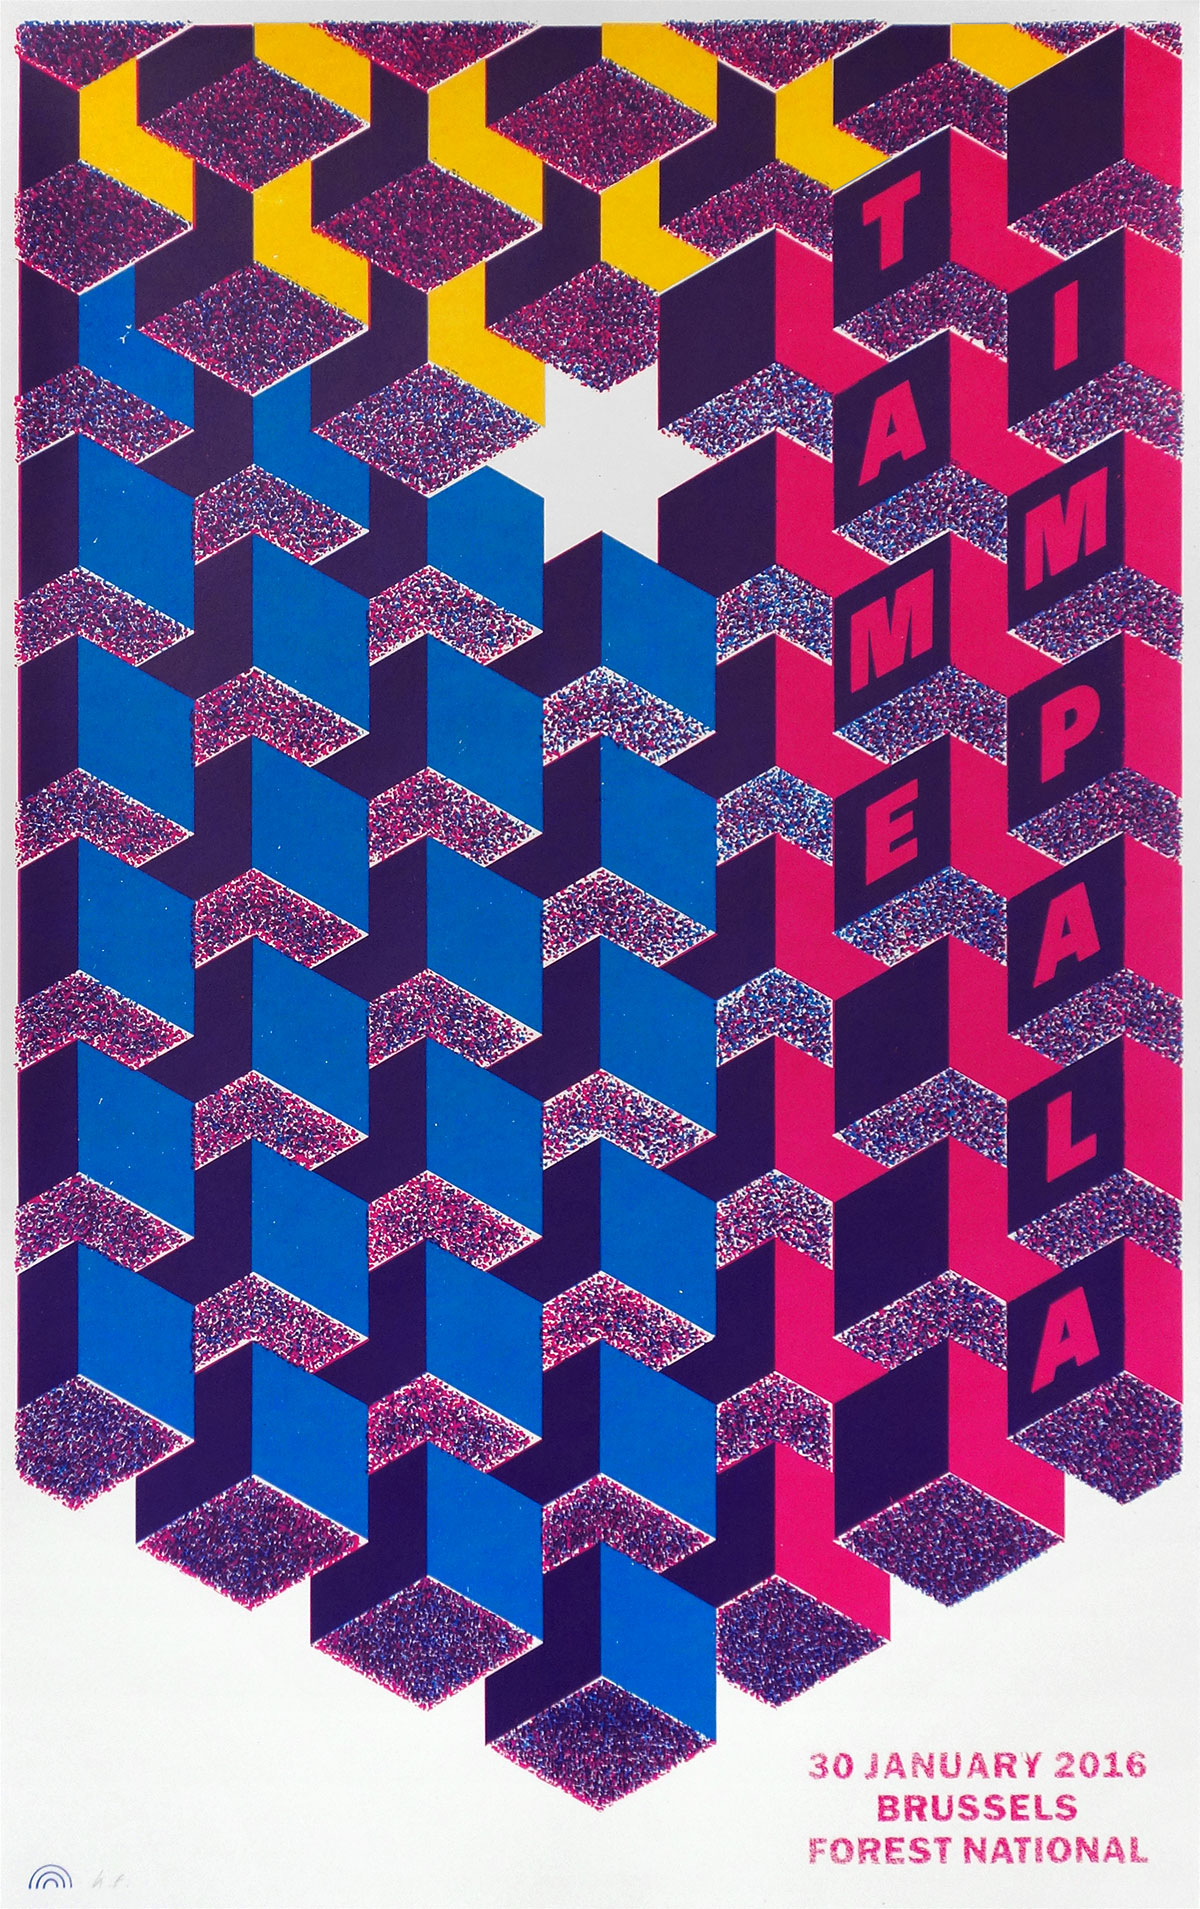 Tame Impala gigposter 02 by Rainbow Posters